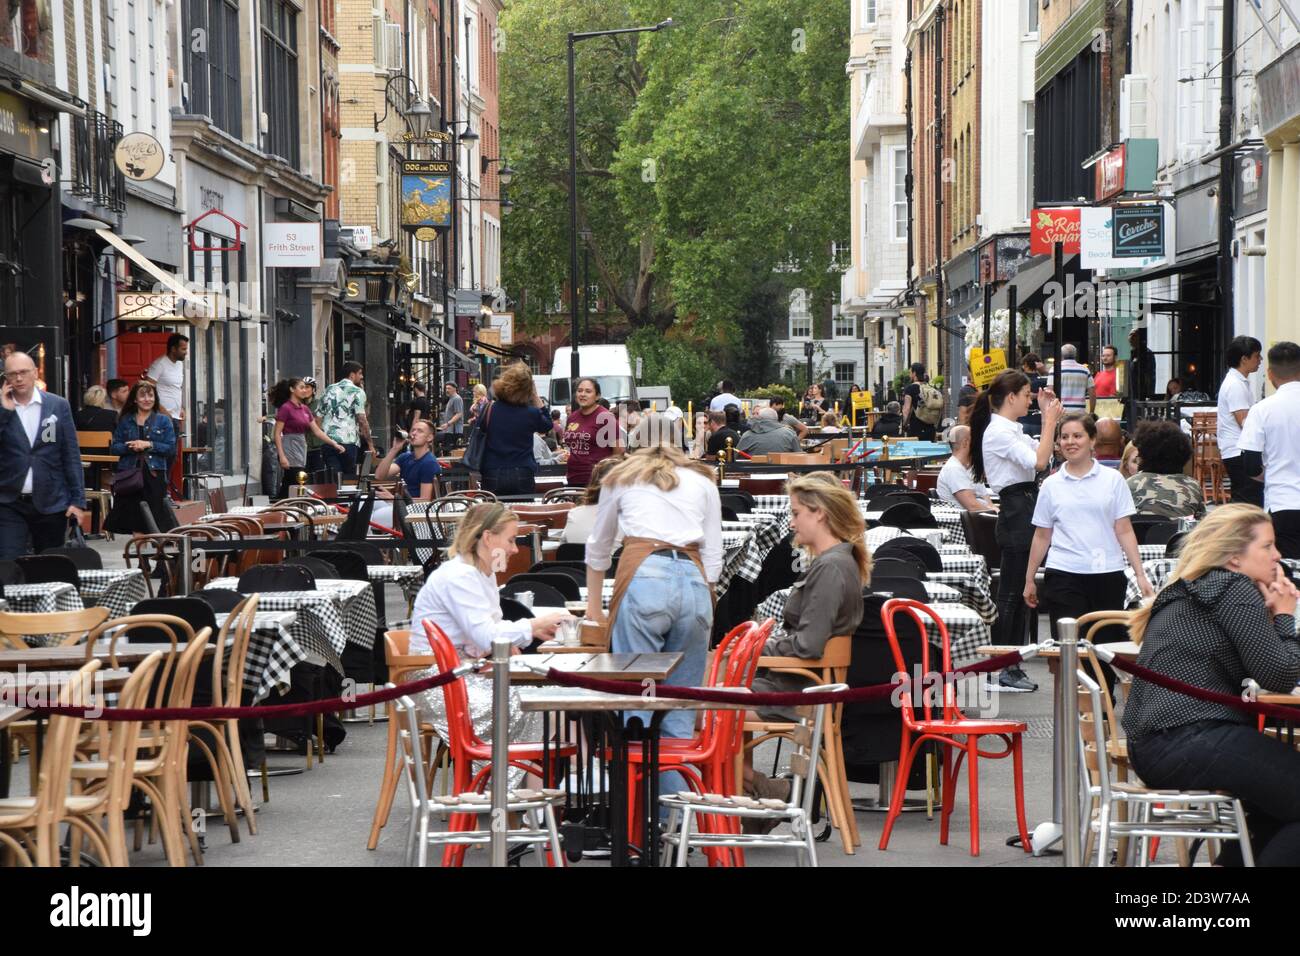 Crowd of people at bars and restaurants in Frith Street, Soho, London 2020. Sections of Soho have been blocked for traffic to allow temporary outdoor street seating and table service to facilitate social distancing during the pandemic. Stock Photo